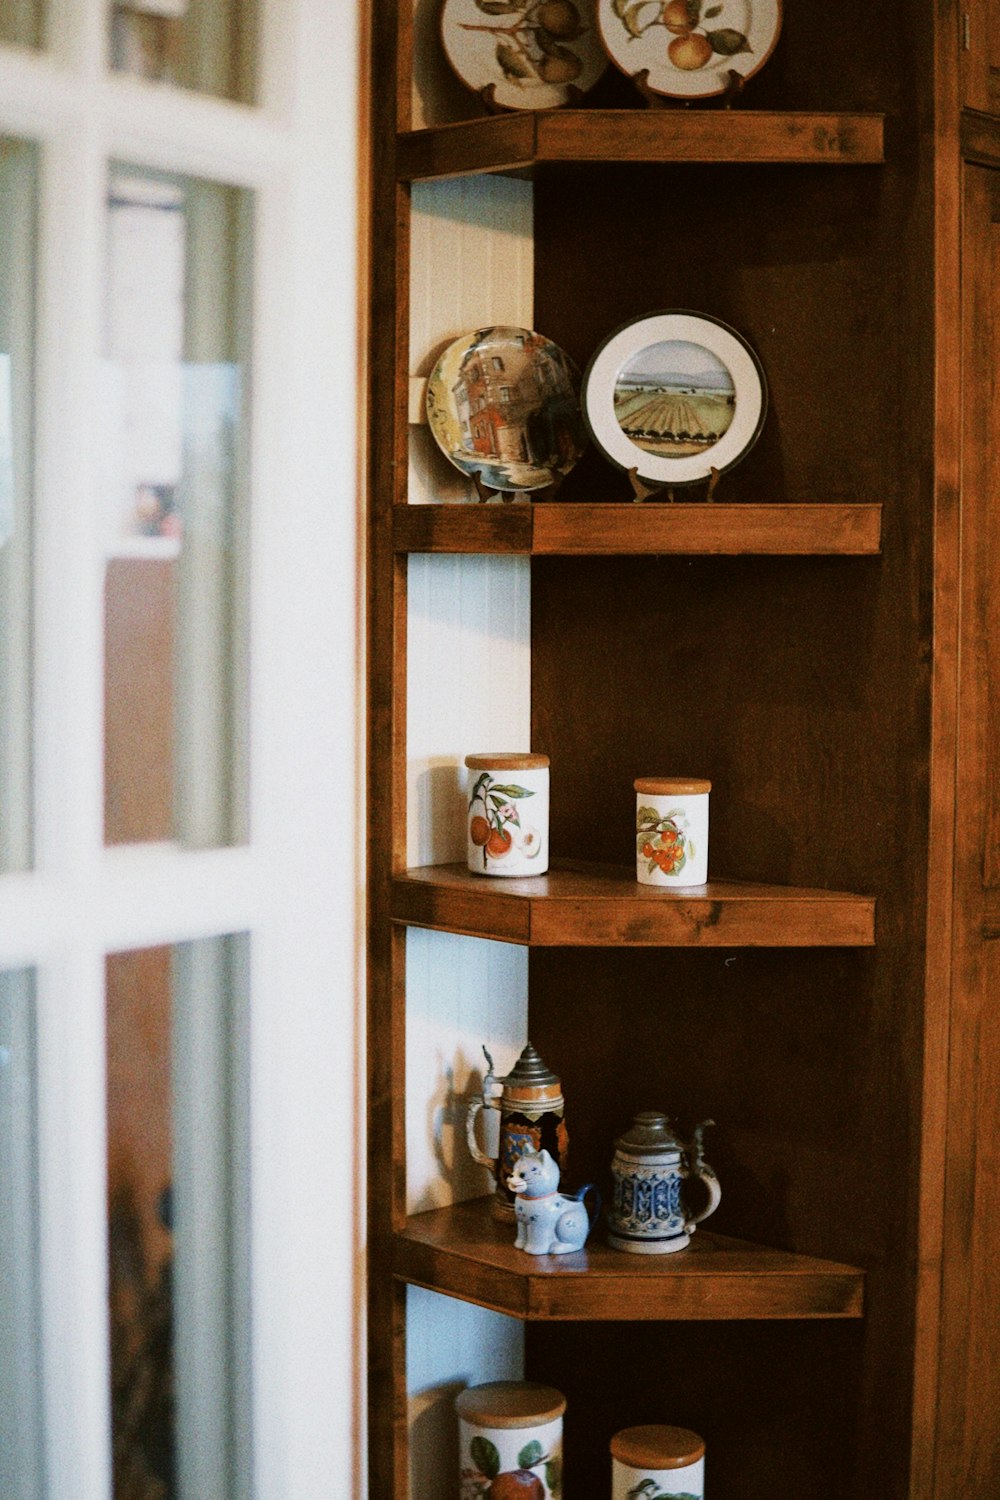 a wooden shelf with plates and cups on it